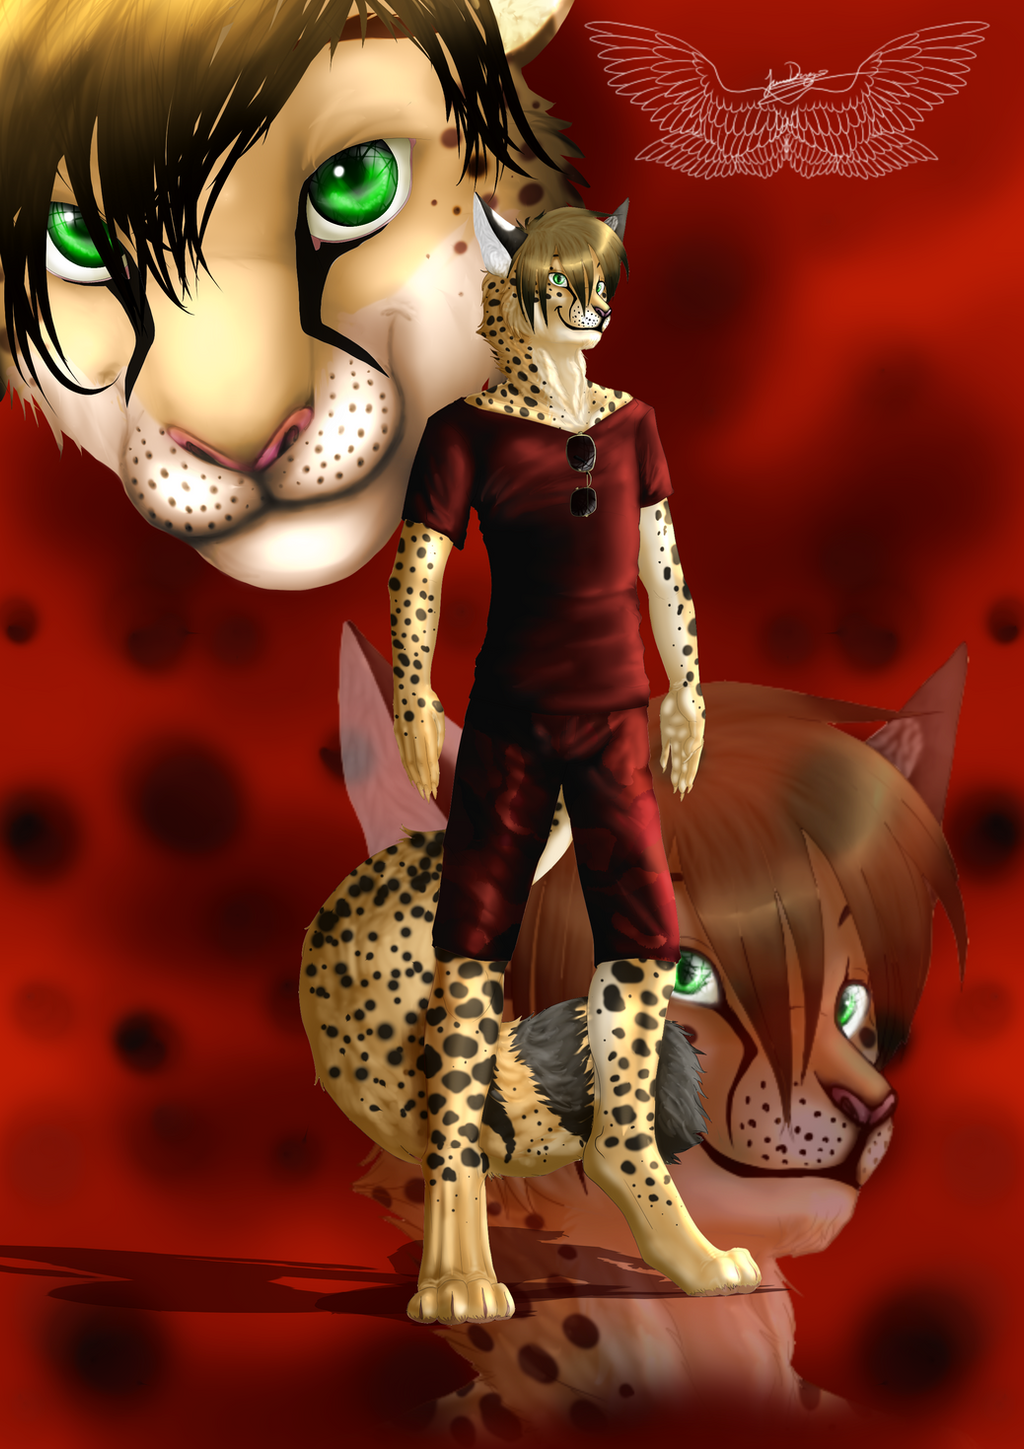 fullbody_commission_for_artask_by_jennathedragon-d738nic.png